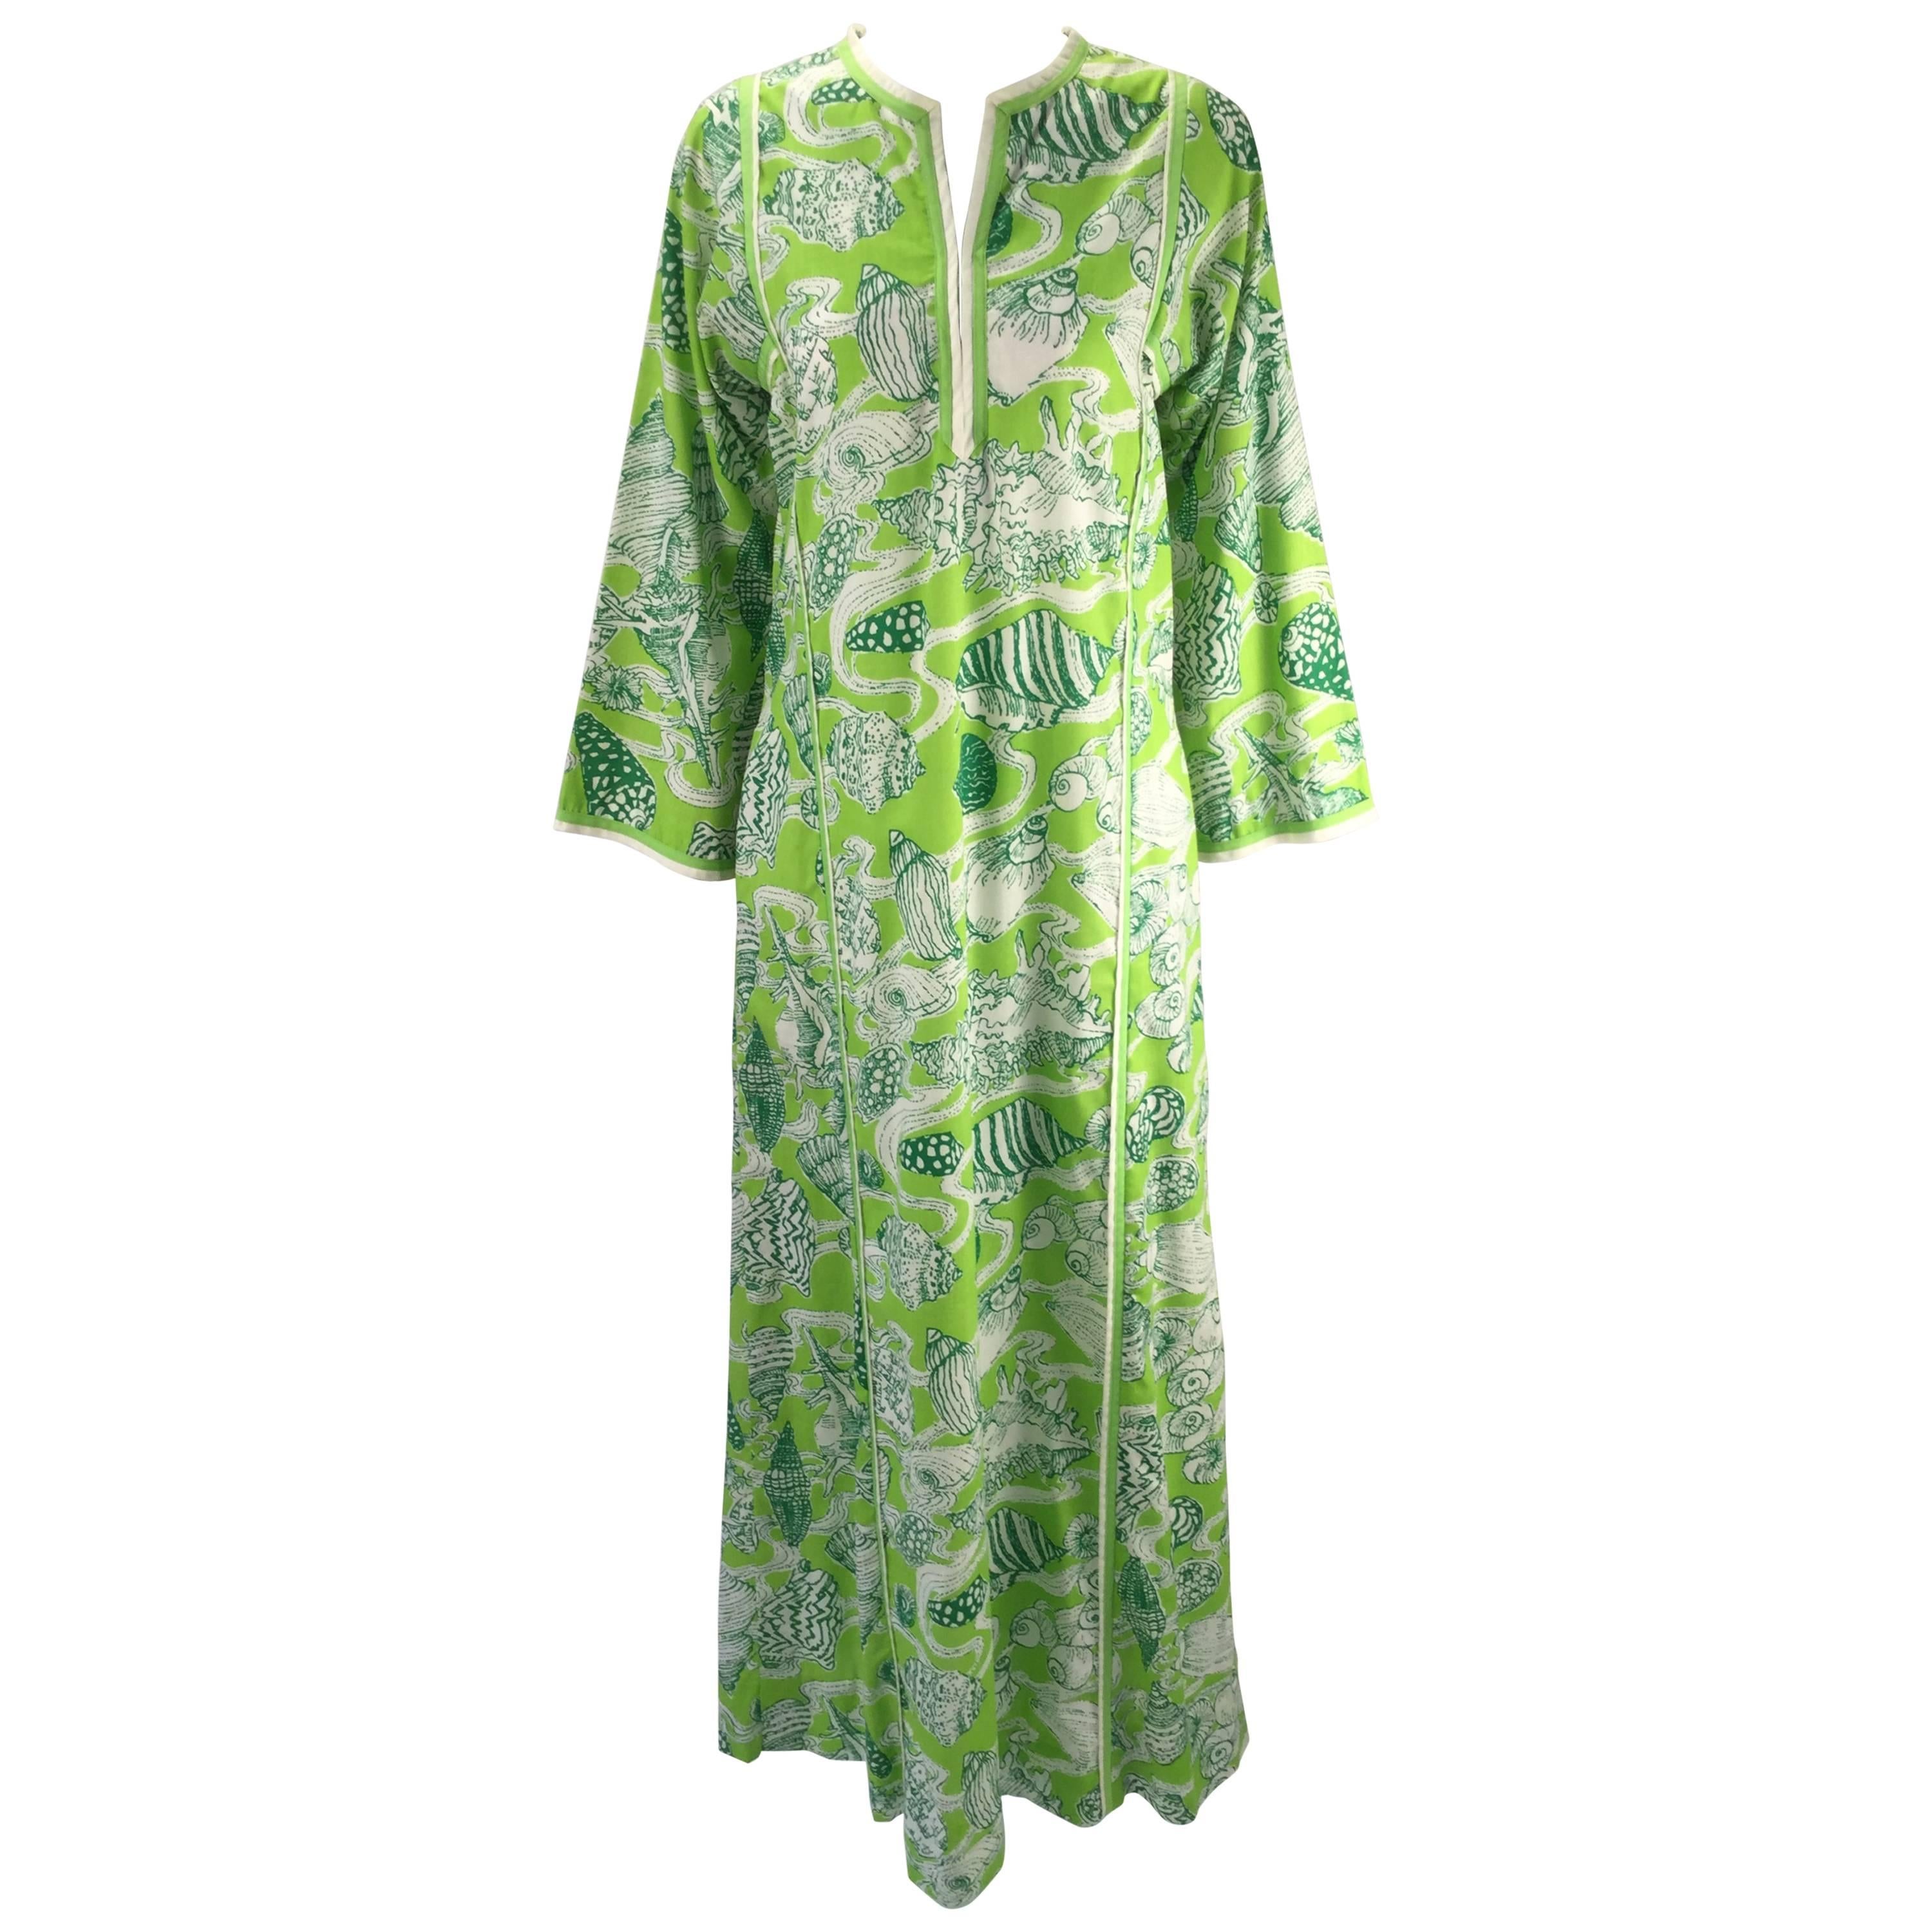 Lilly Pulitzer "The Lilly" Green Sea Shell Print Kaftan, 1960s 